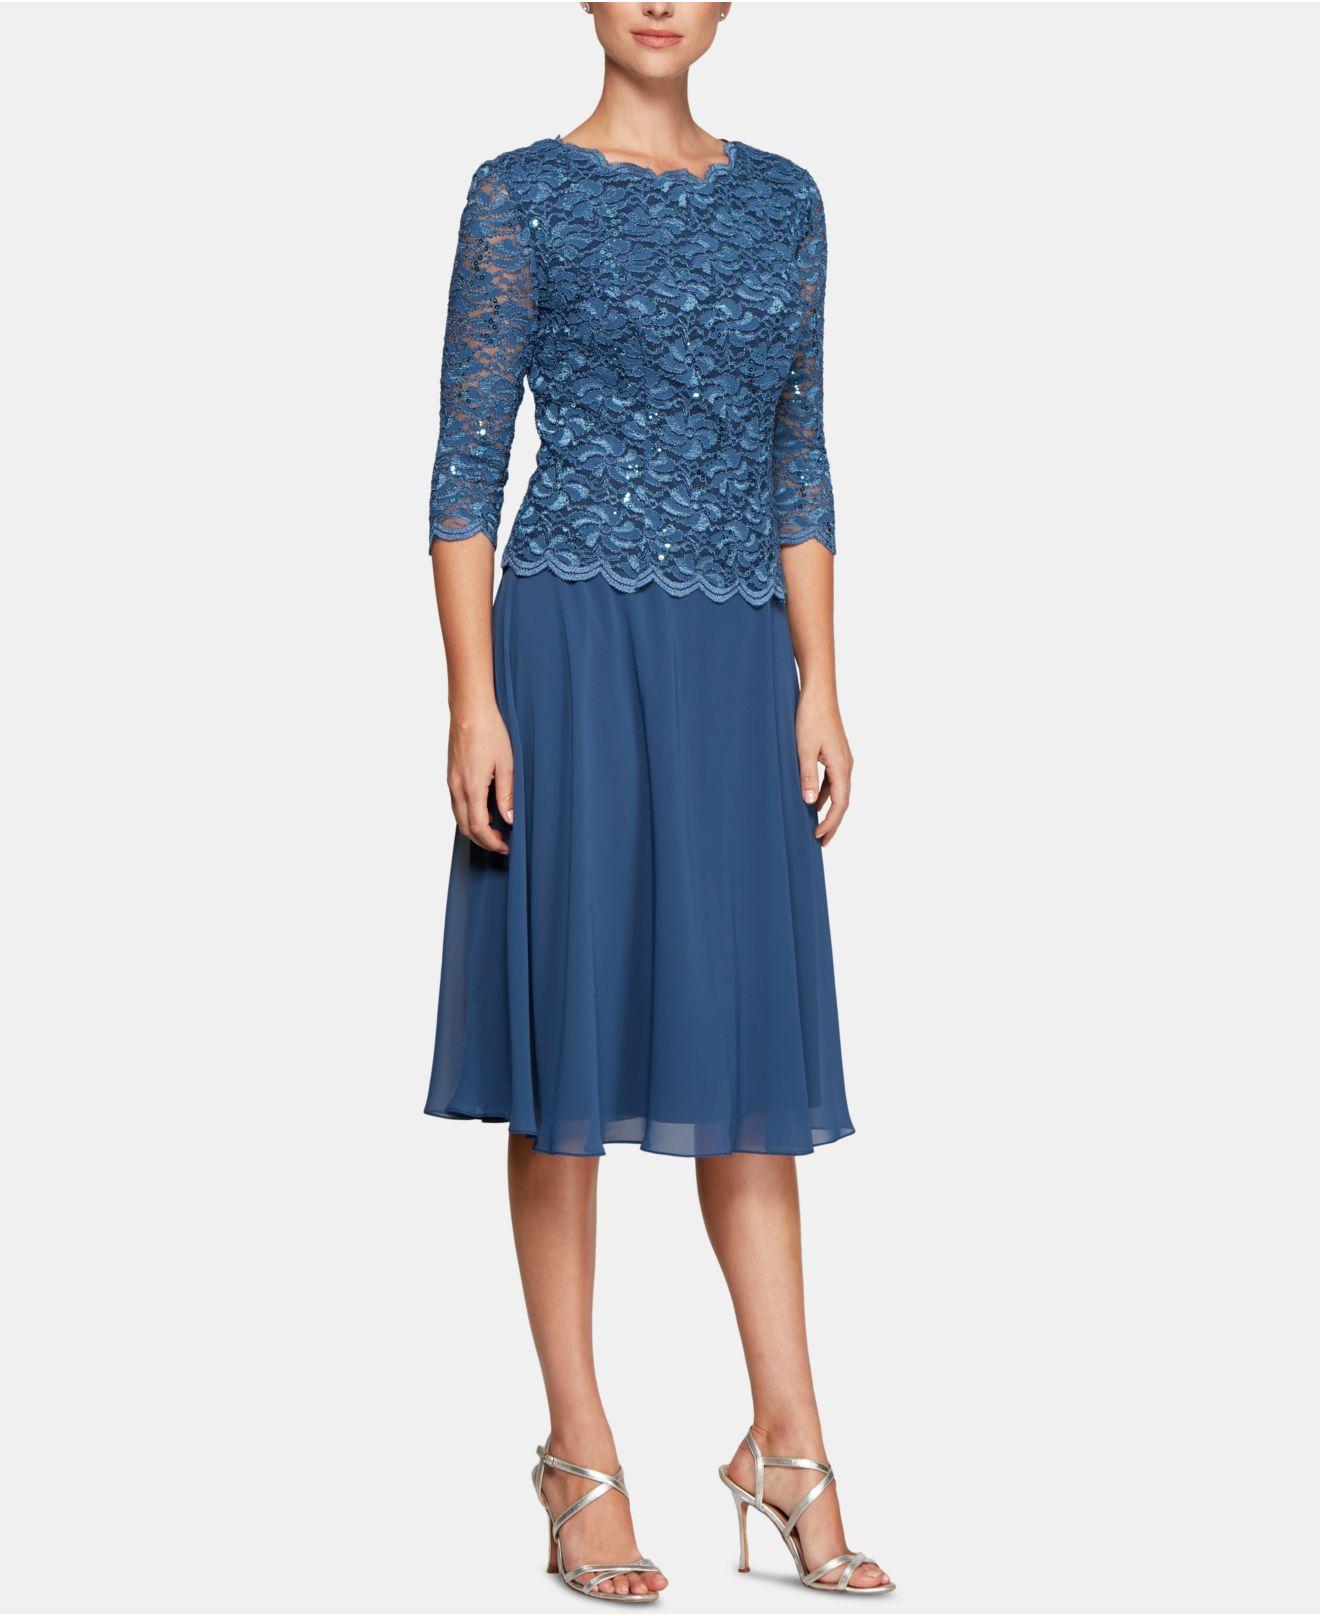 Lyst - Alex Evenings Sequined Lace Contrast Dress in Blue